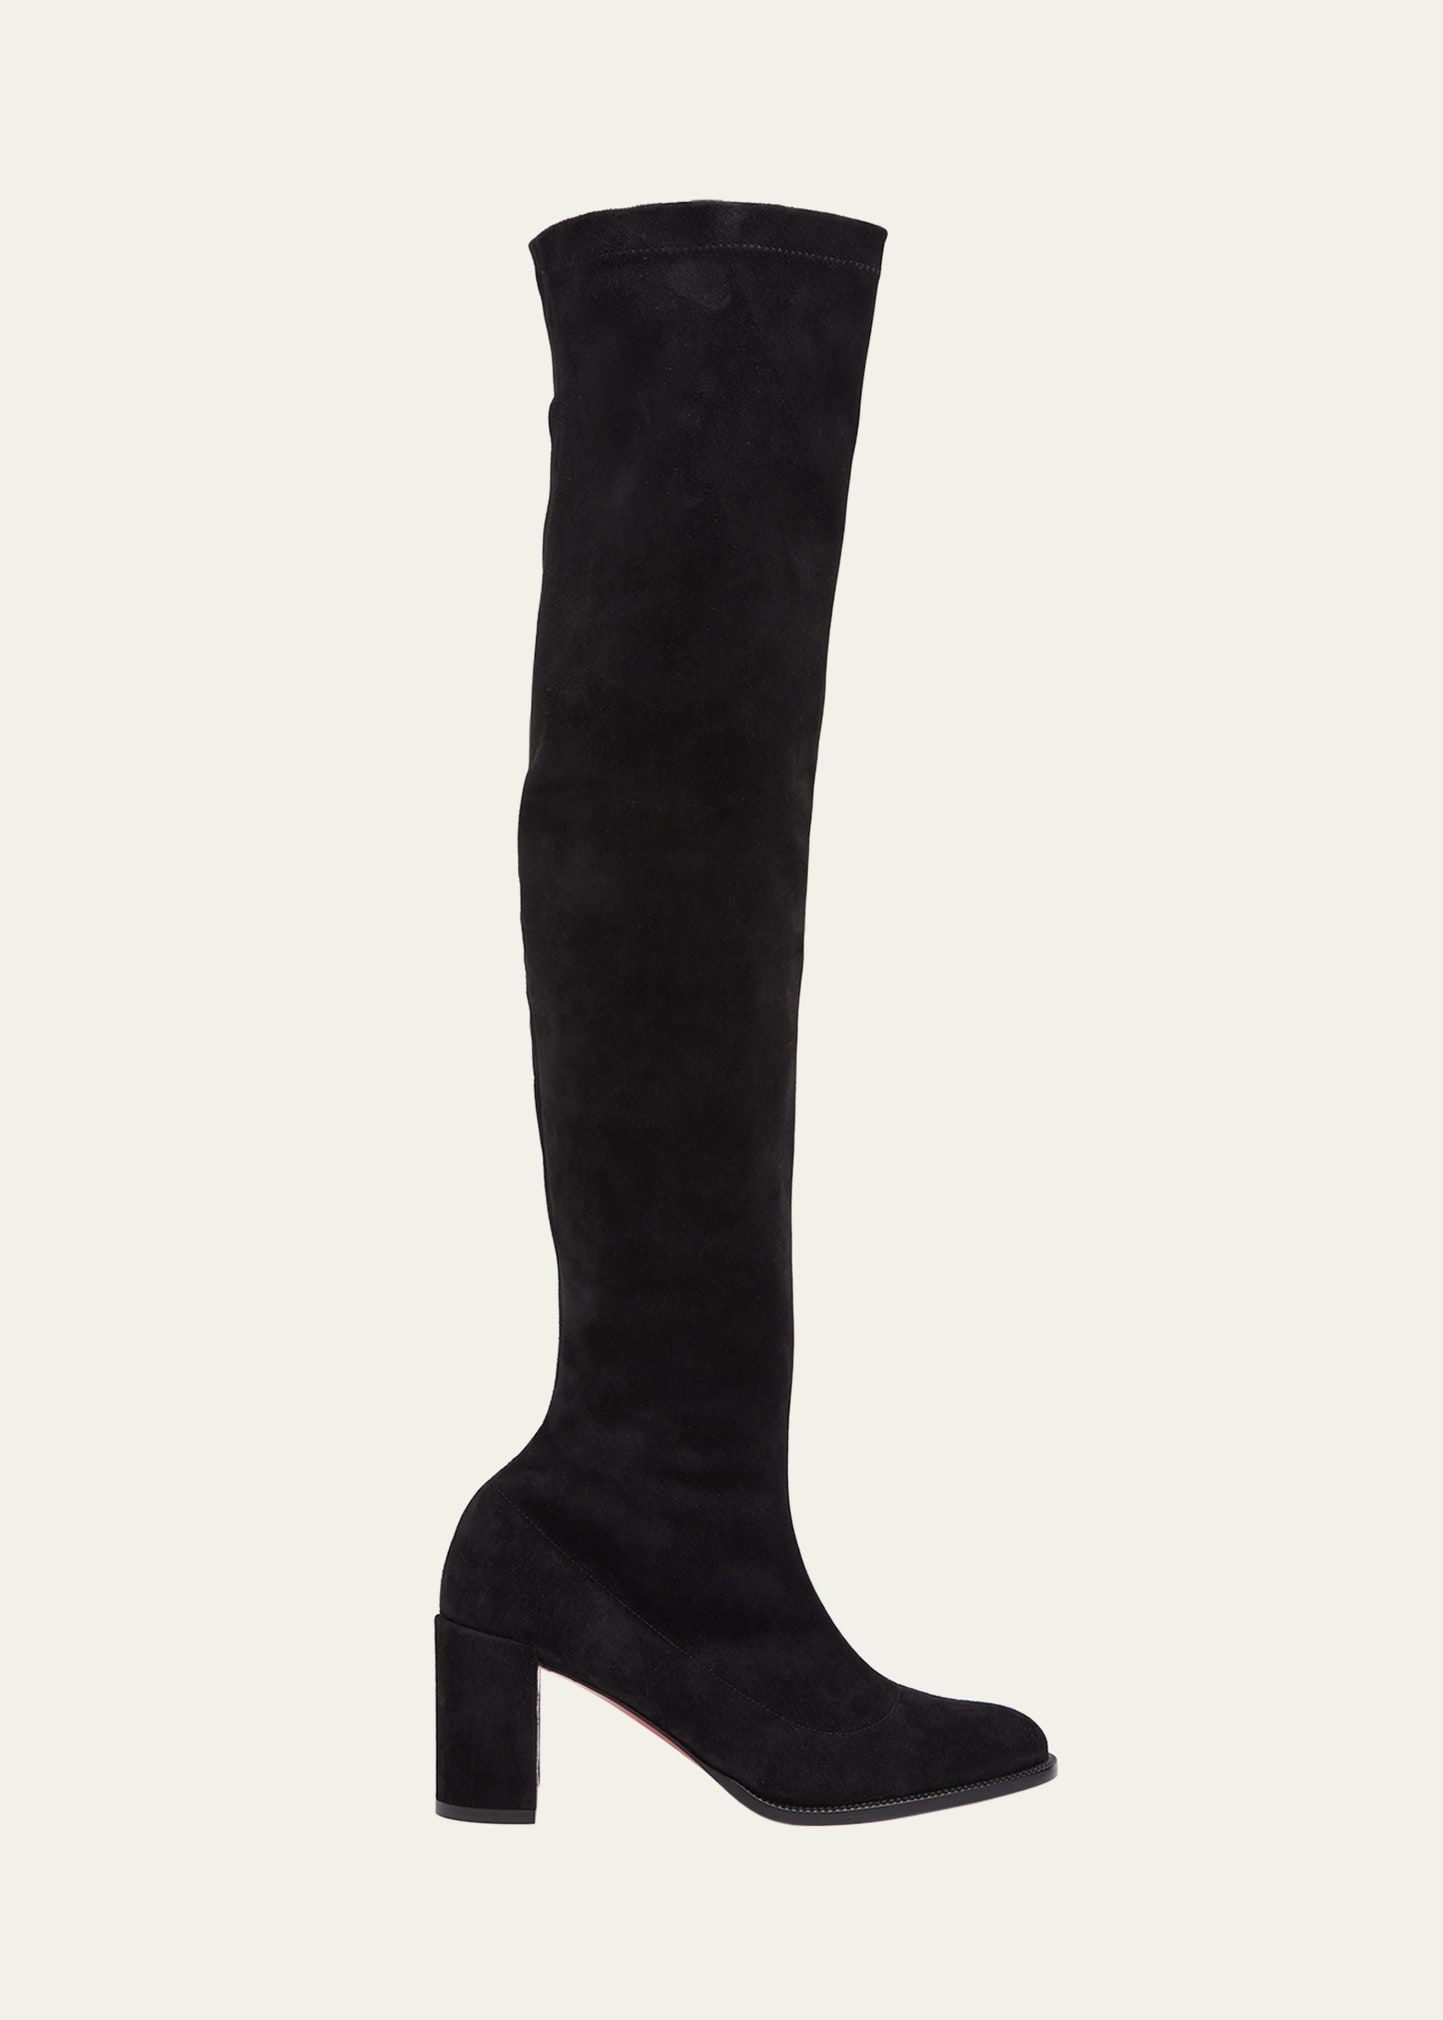 Adoxa Stretch Suede Red-Sole Over-The-Knee Boots